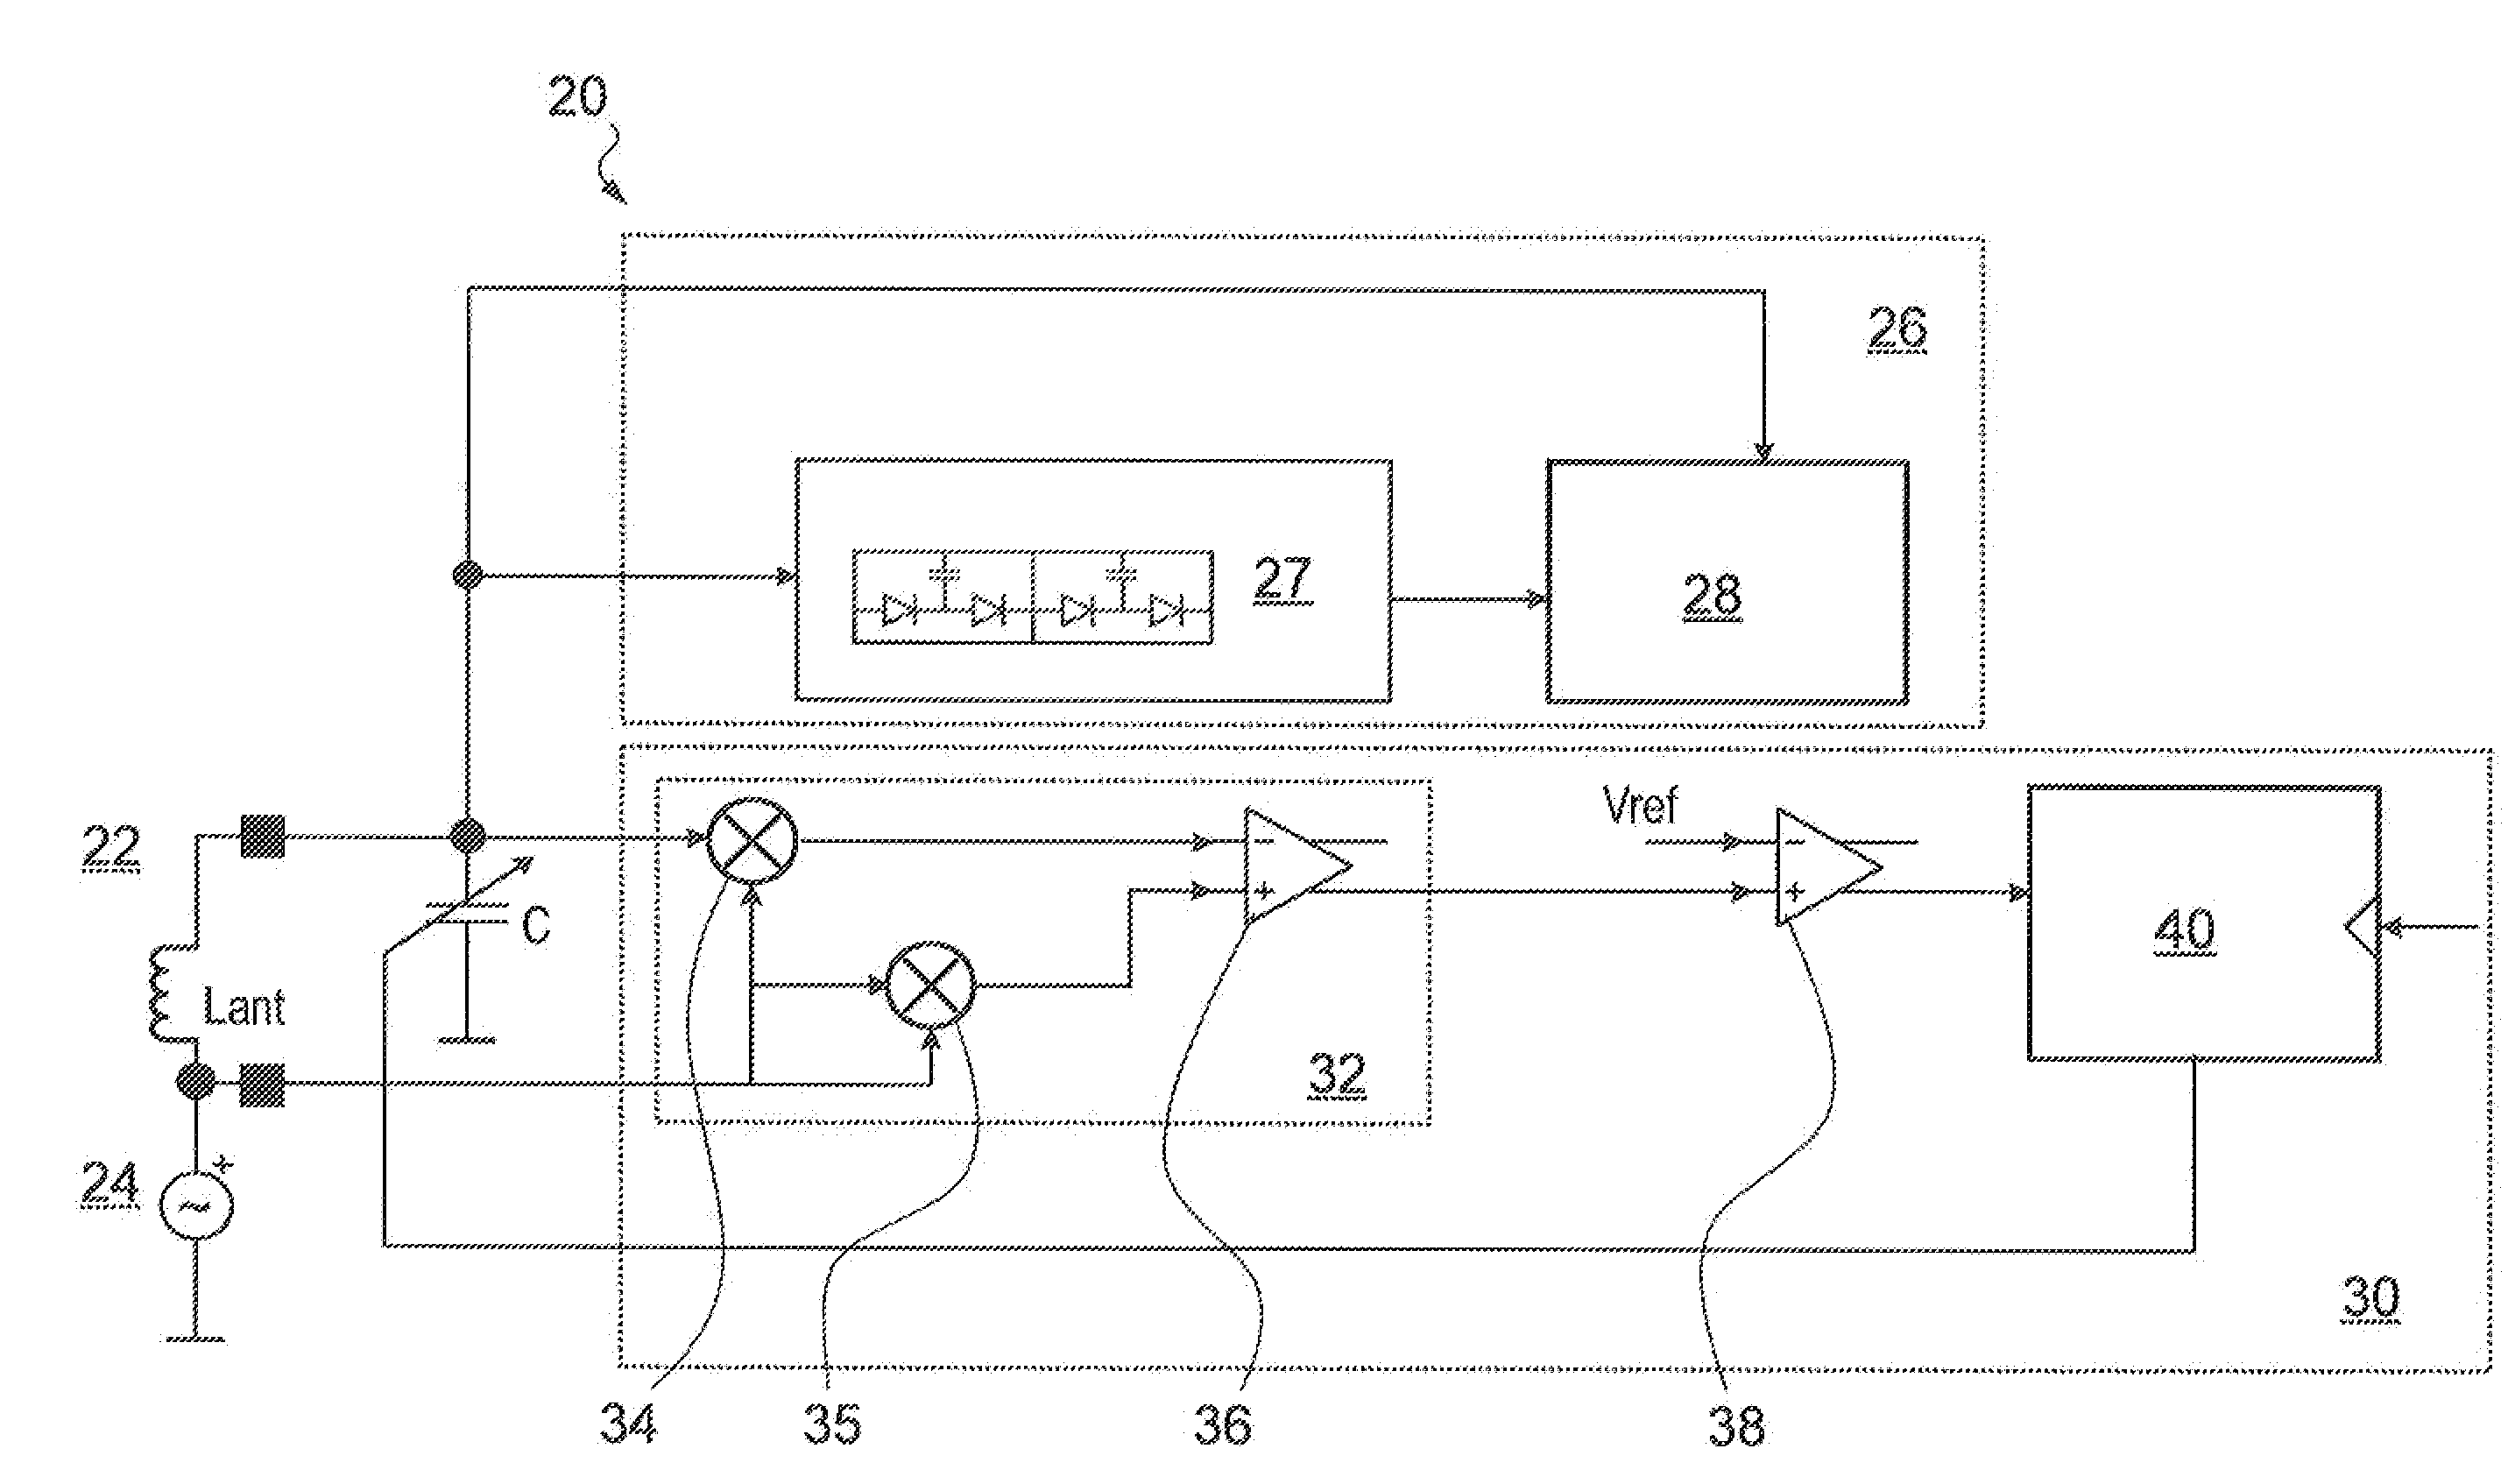 Non-contact communication device and method of operating the same